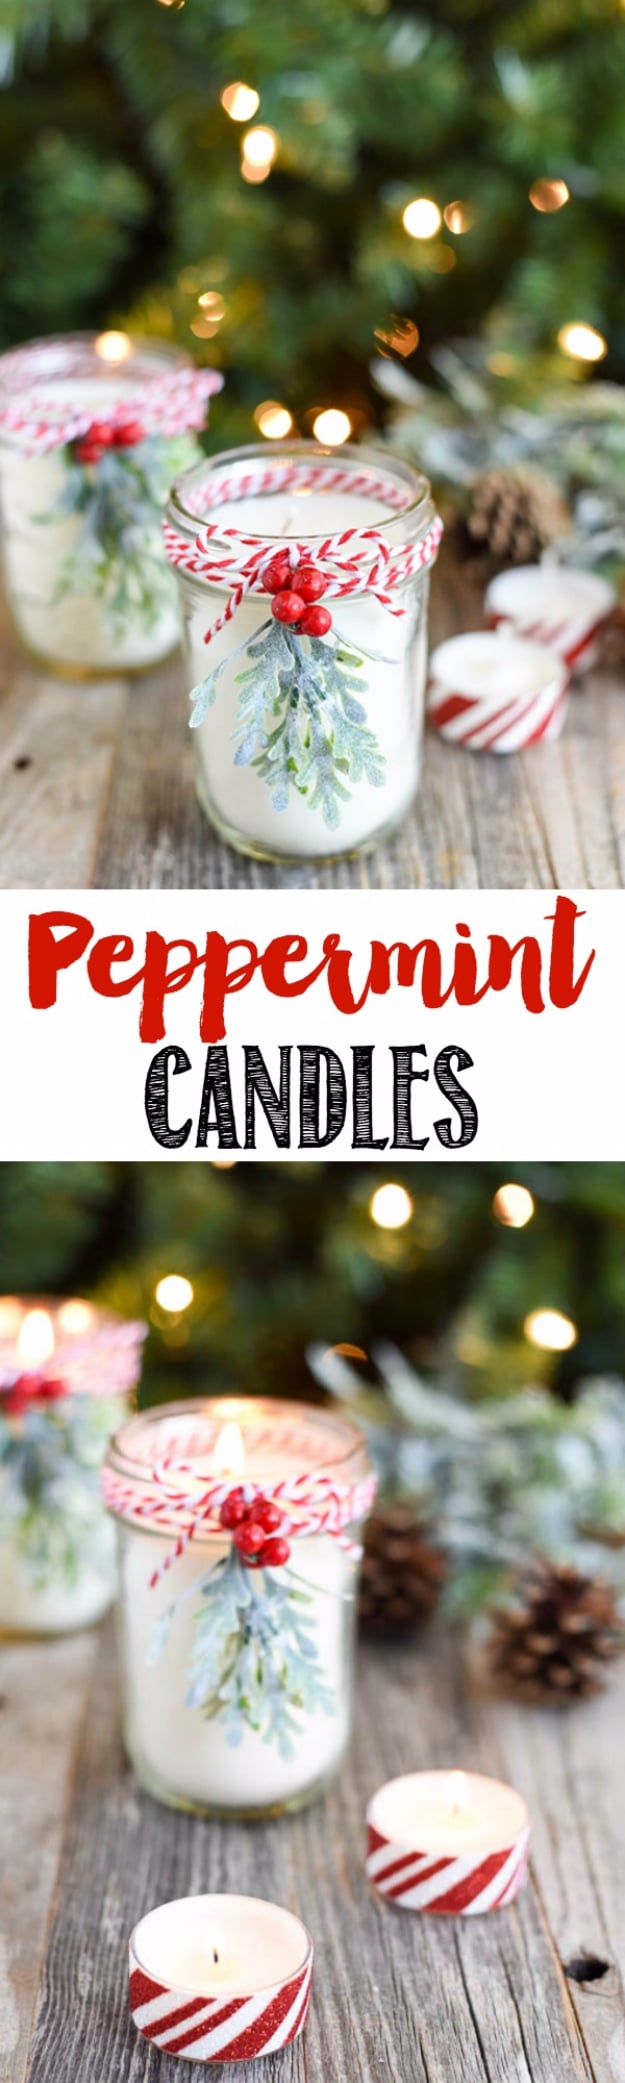 Best DIY Ideas for Wintertime - DIY Peppermint Mason Jar Candles - Winter Crafts with Snowflakes, Icicle Art and Projects, Wreaths, Woodland and Winter Wonderland Decor, Mason Jars and Dollar Store Ideas - Easy DIY Ideas to Decorate Home and Room for Winter - Creative Home Decor and Room Decorations for Adults, Teens and Kids #diy #winter #crafts